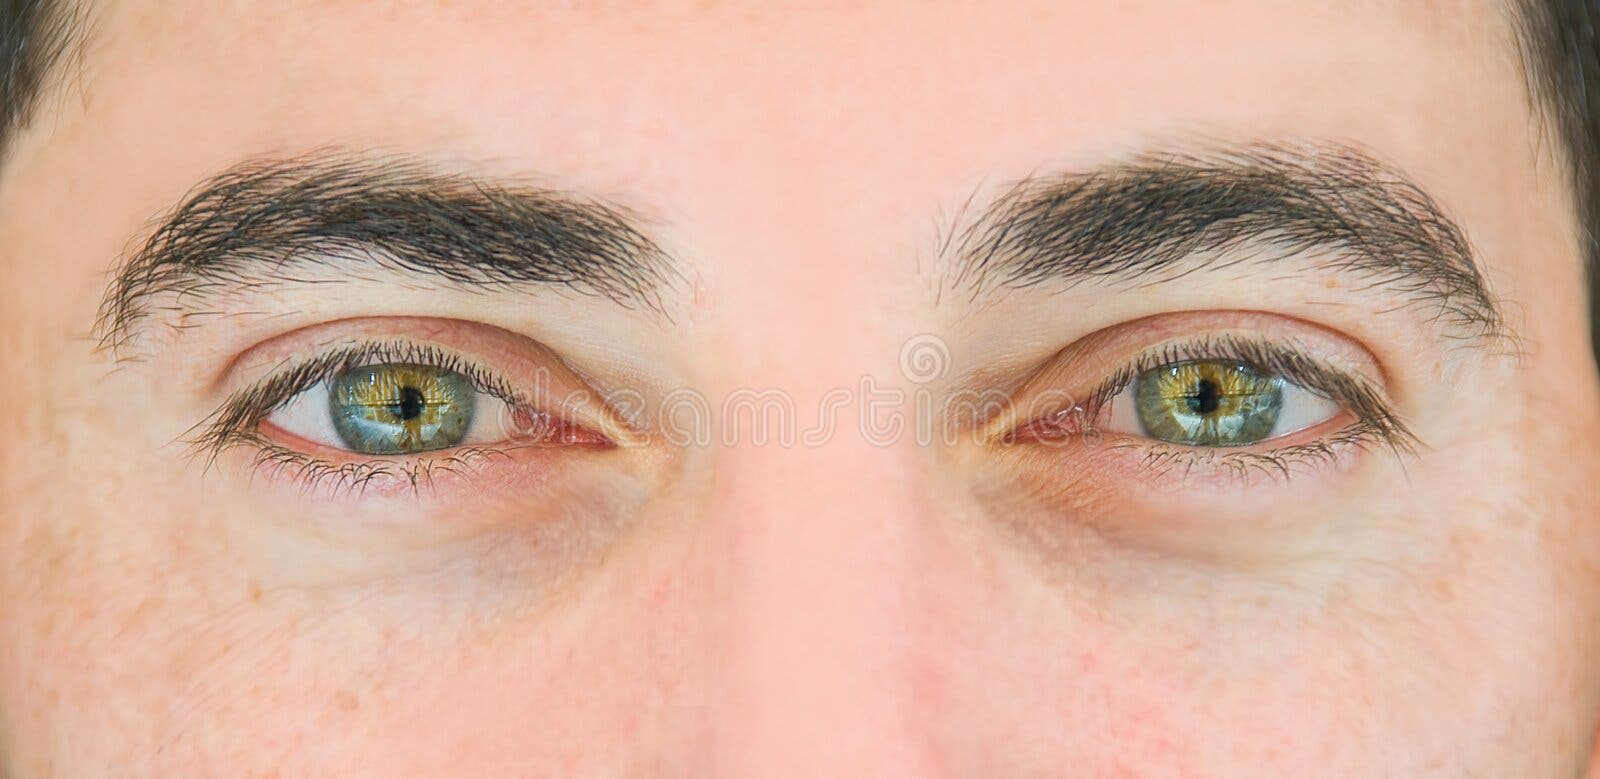 Brown Eye Part Of A Male Face Focus On Pupil Stock Photo